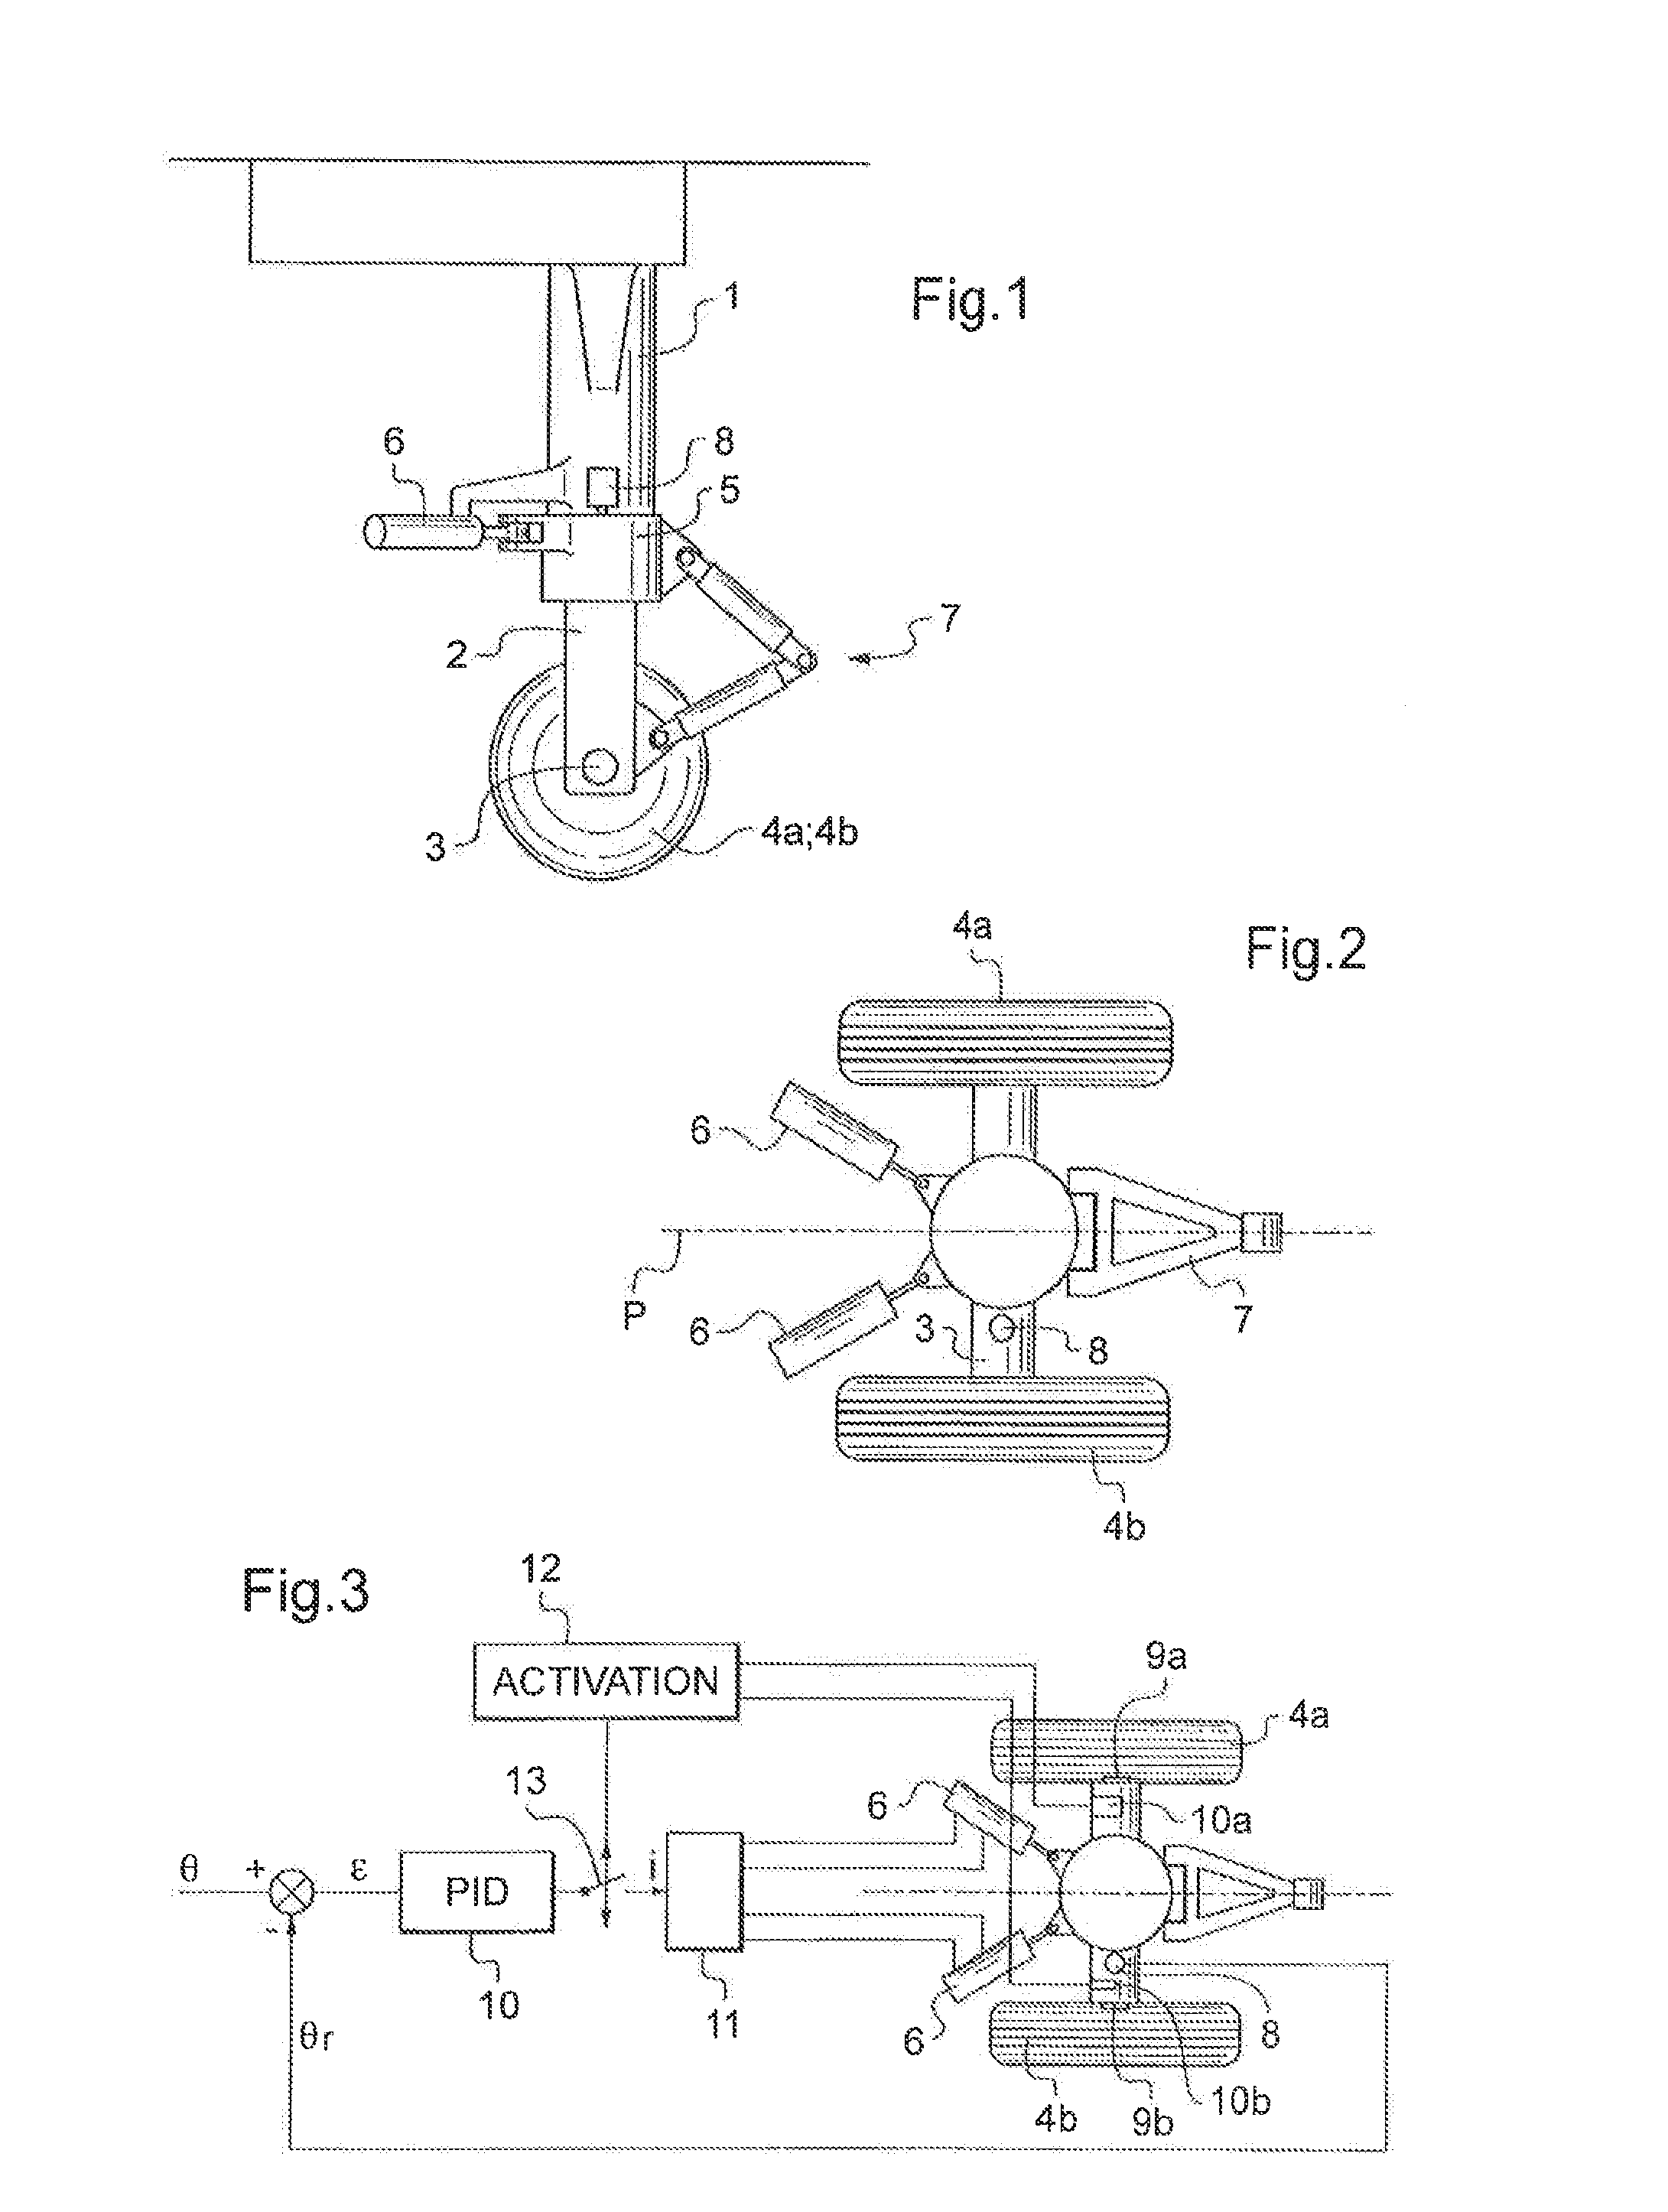 Method of managing the steering of aircraft wheels, in particular in the event of a tire bursting or deflating